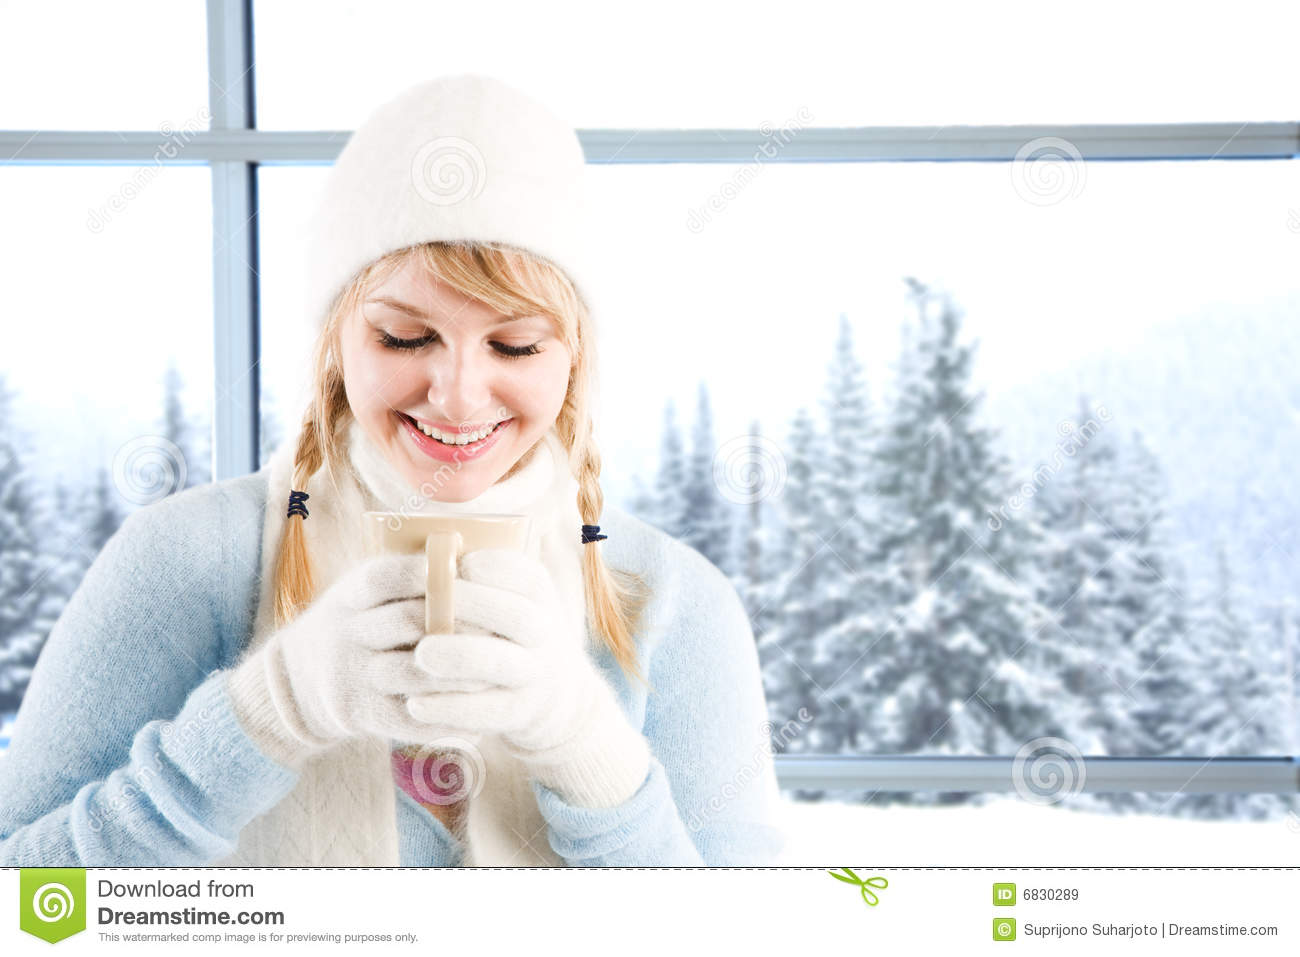 Caucasian Girl Drinking Hot Coffee At A Ski Resort On A Snowy Day